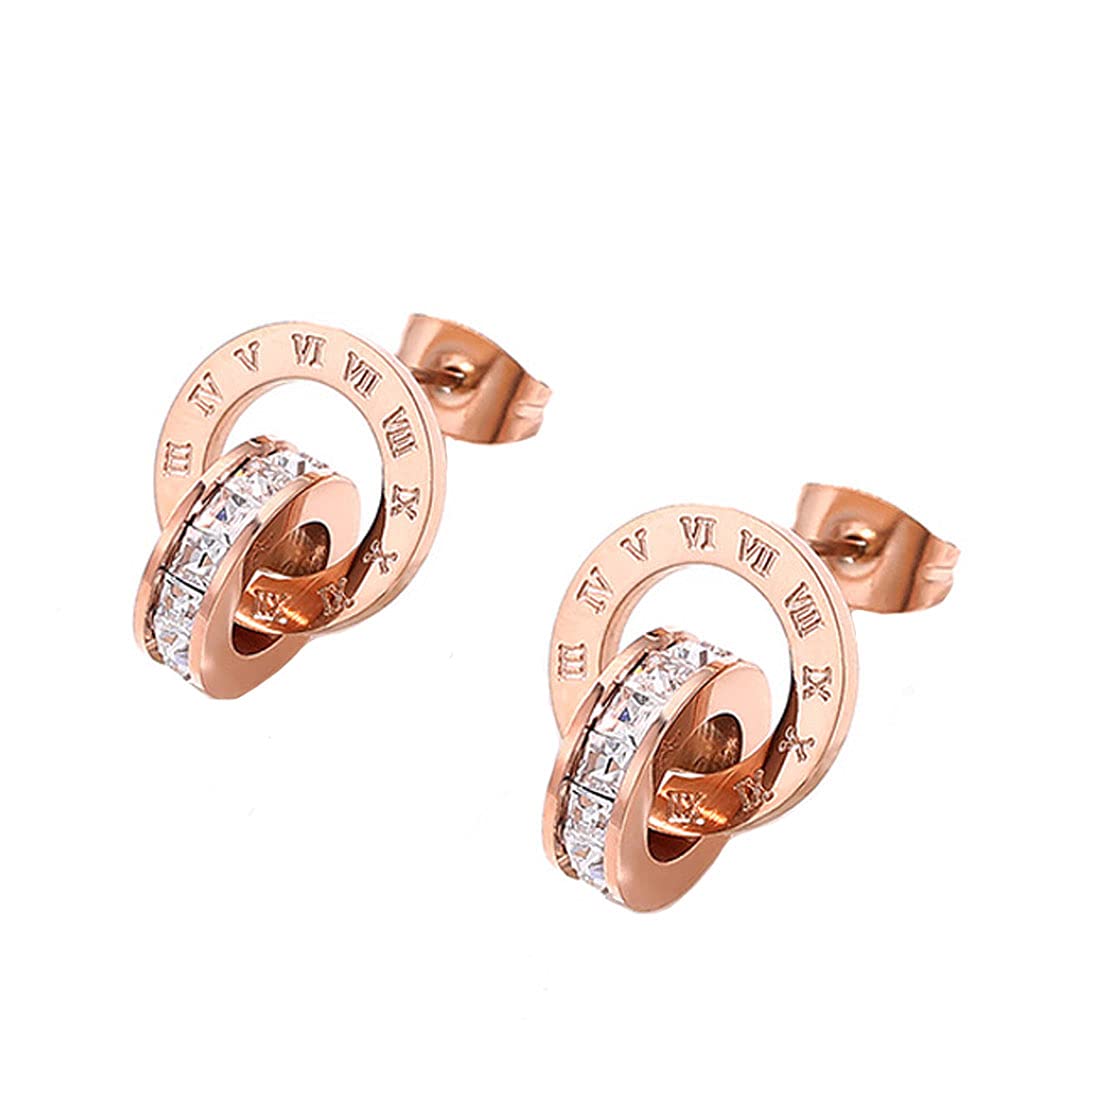 Yellow Chimes Earrings for Women Western Rose Gold Plated Stainless Steel Roman Numericals Engraved Crystal Statement Drop Earrings for Women and Girls.